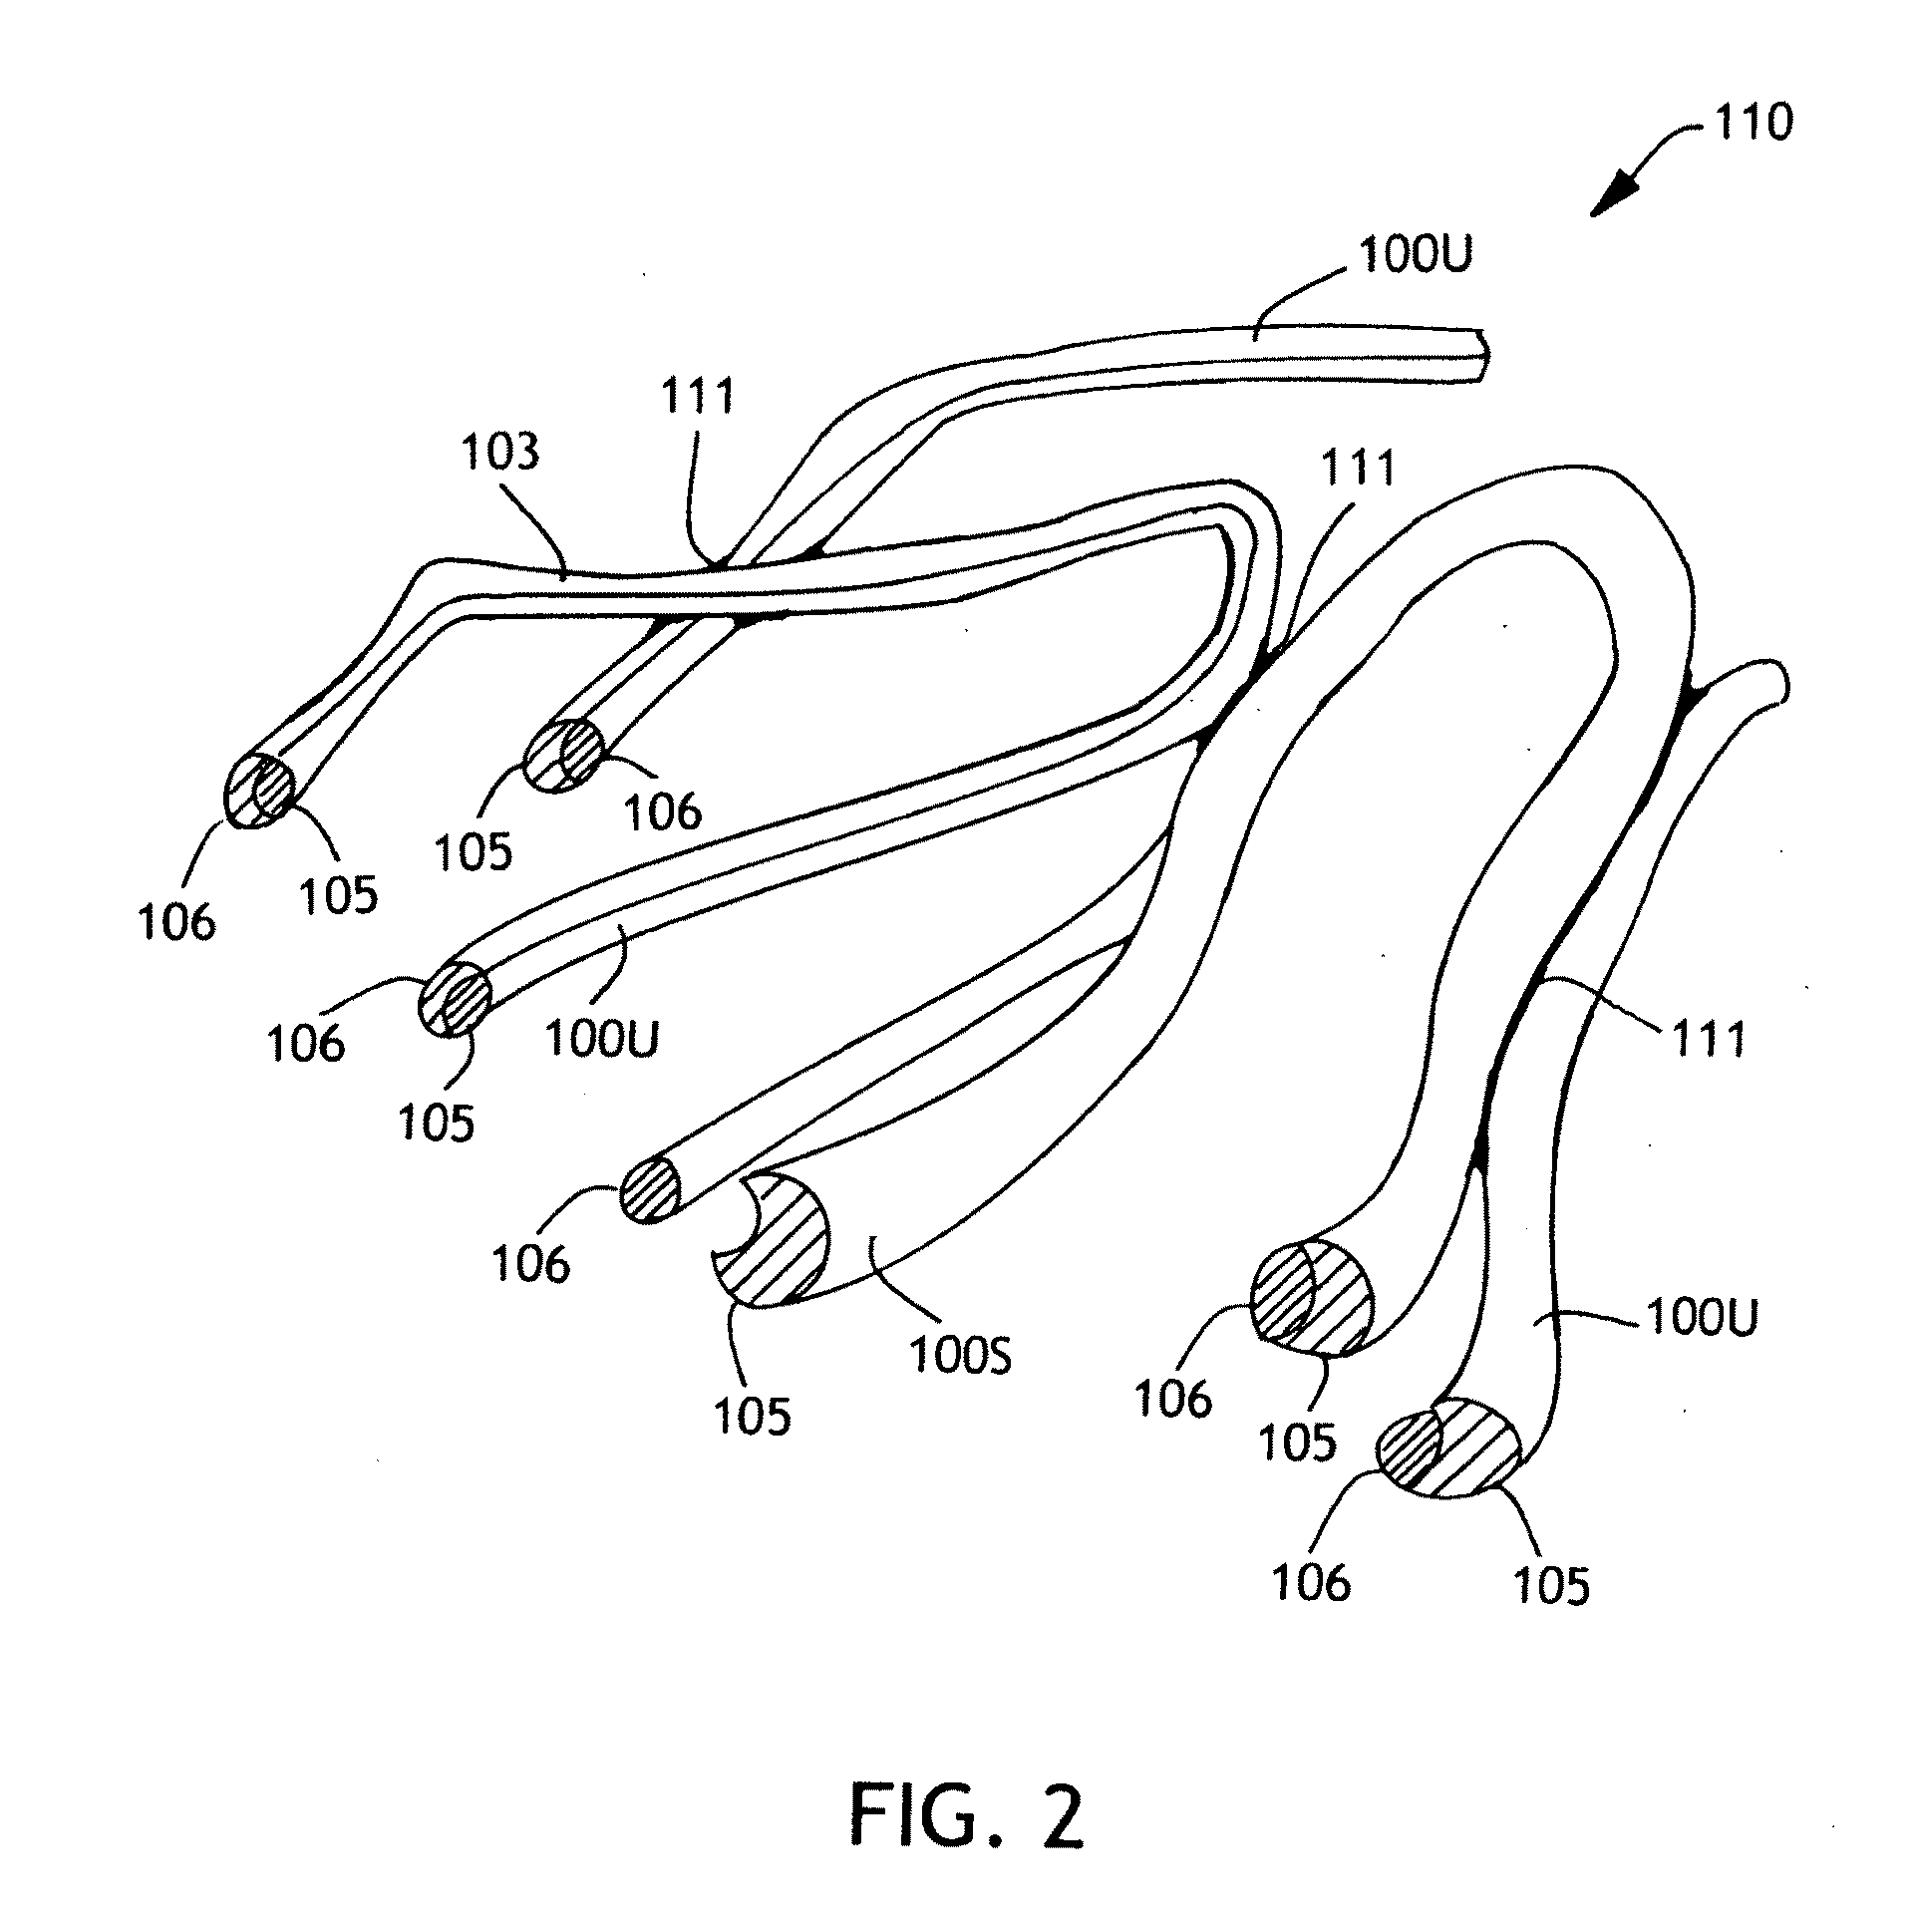 Nonwoven web and filter media containing partially split multicomponent fibers